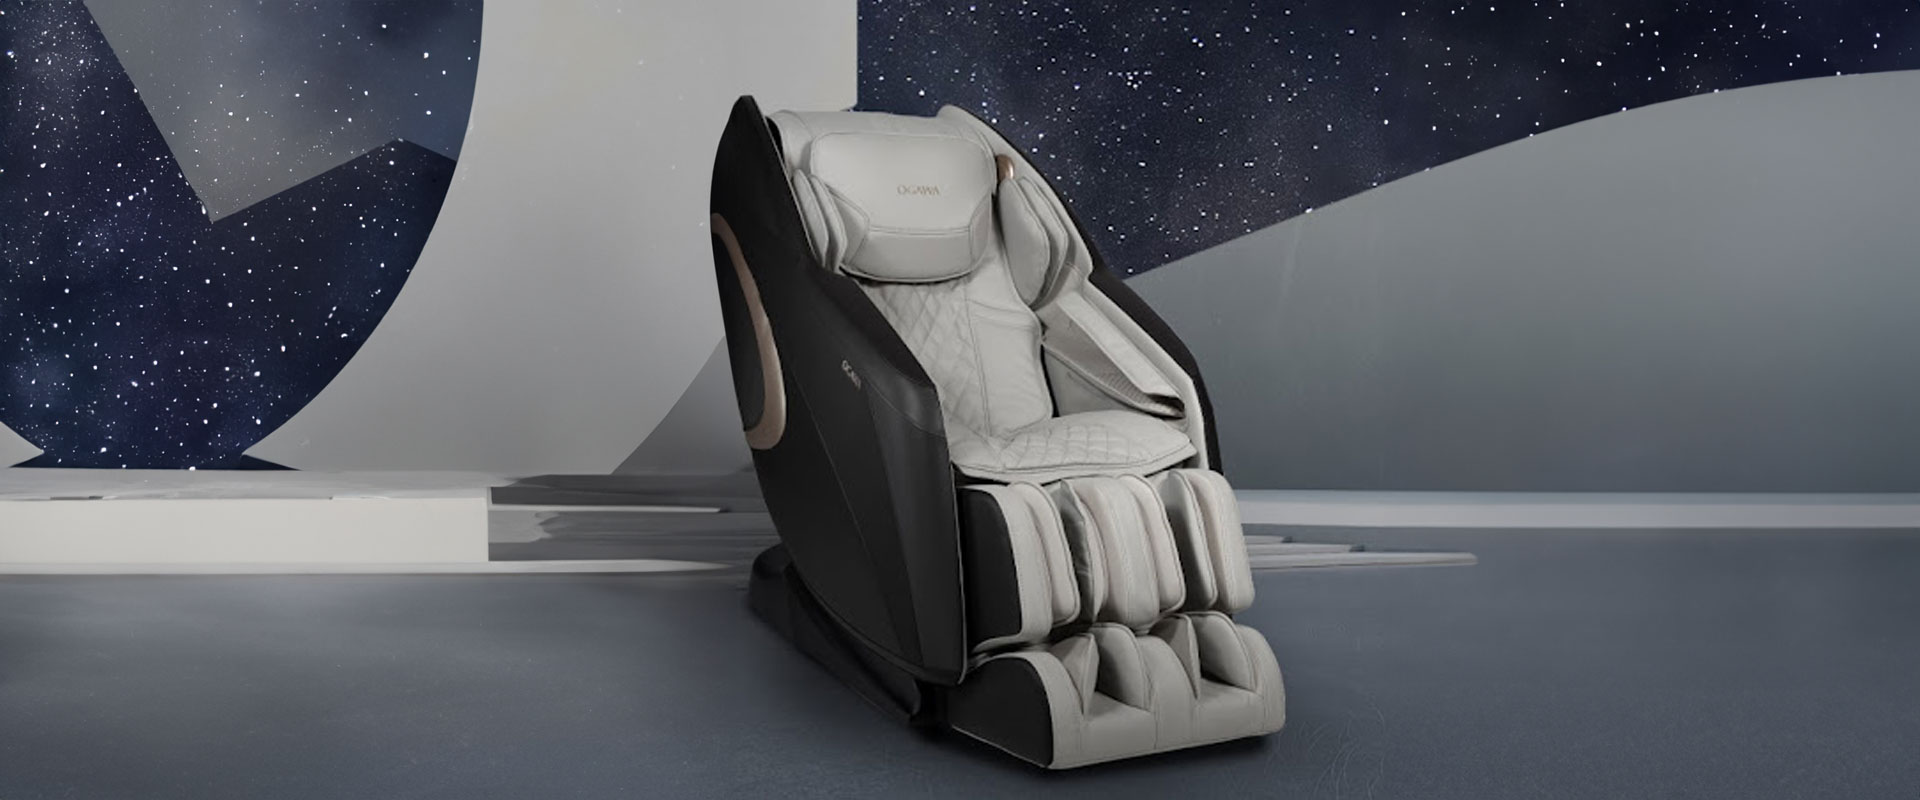 best selling massage chair